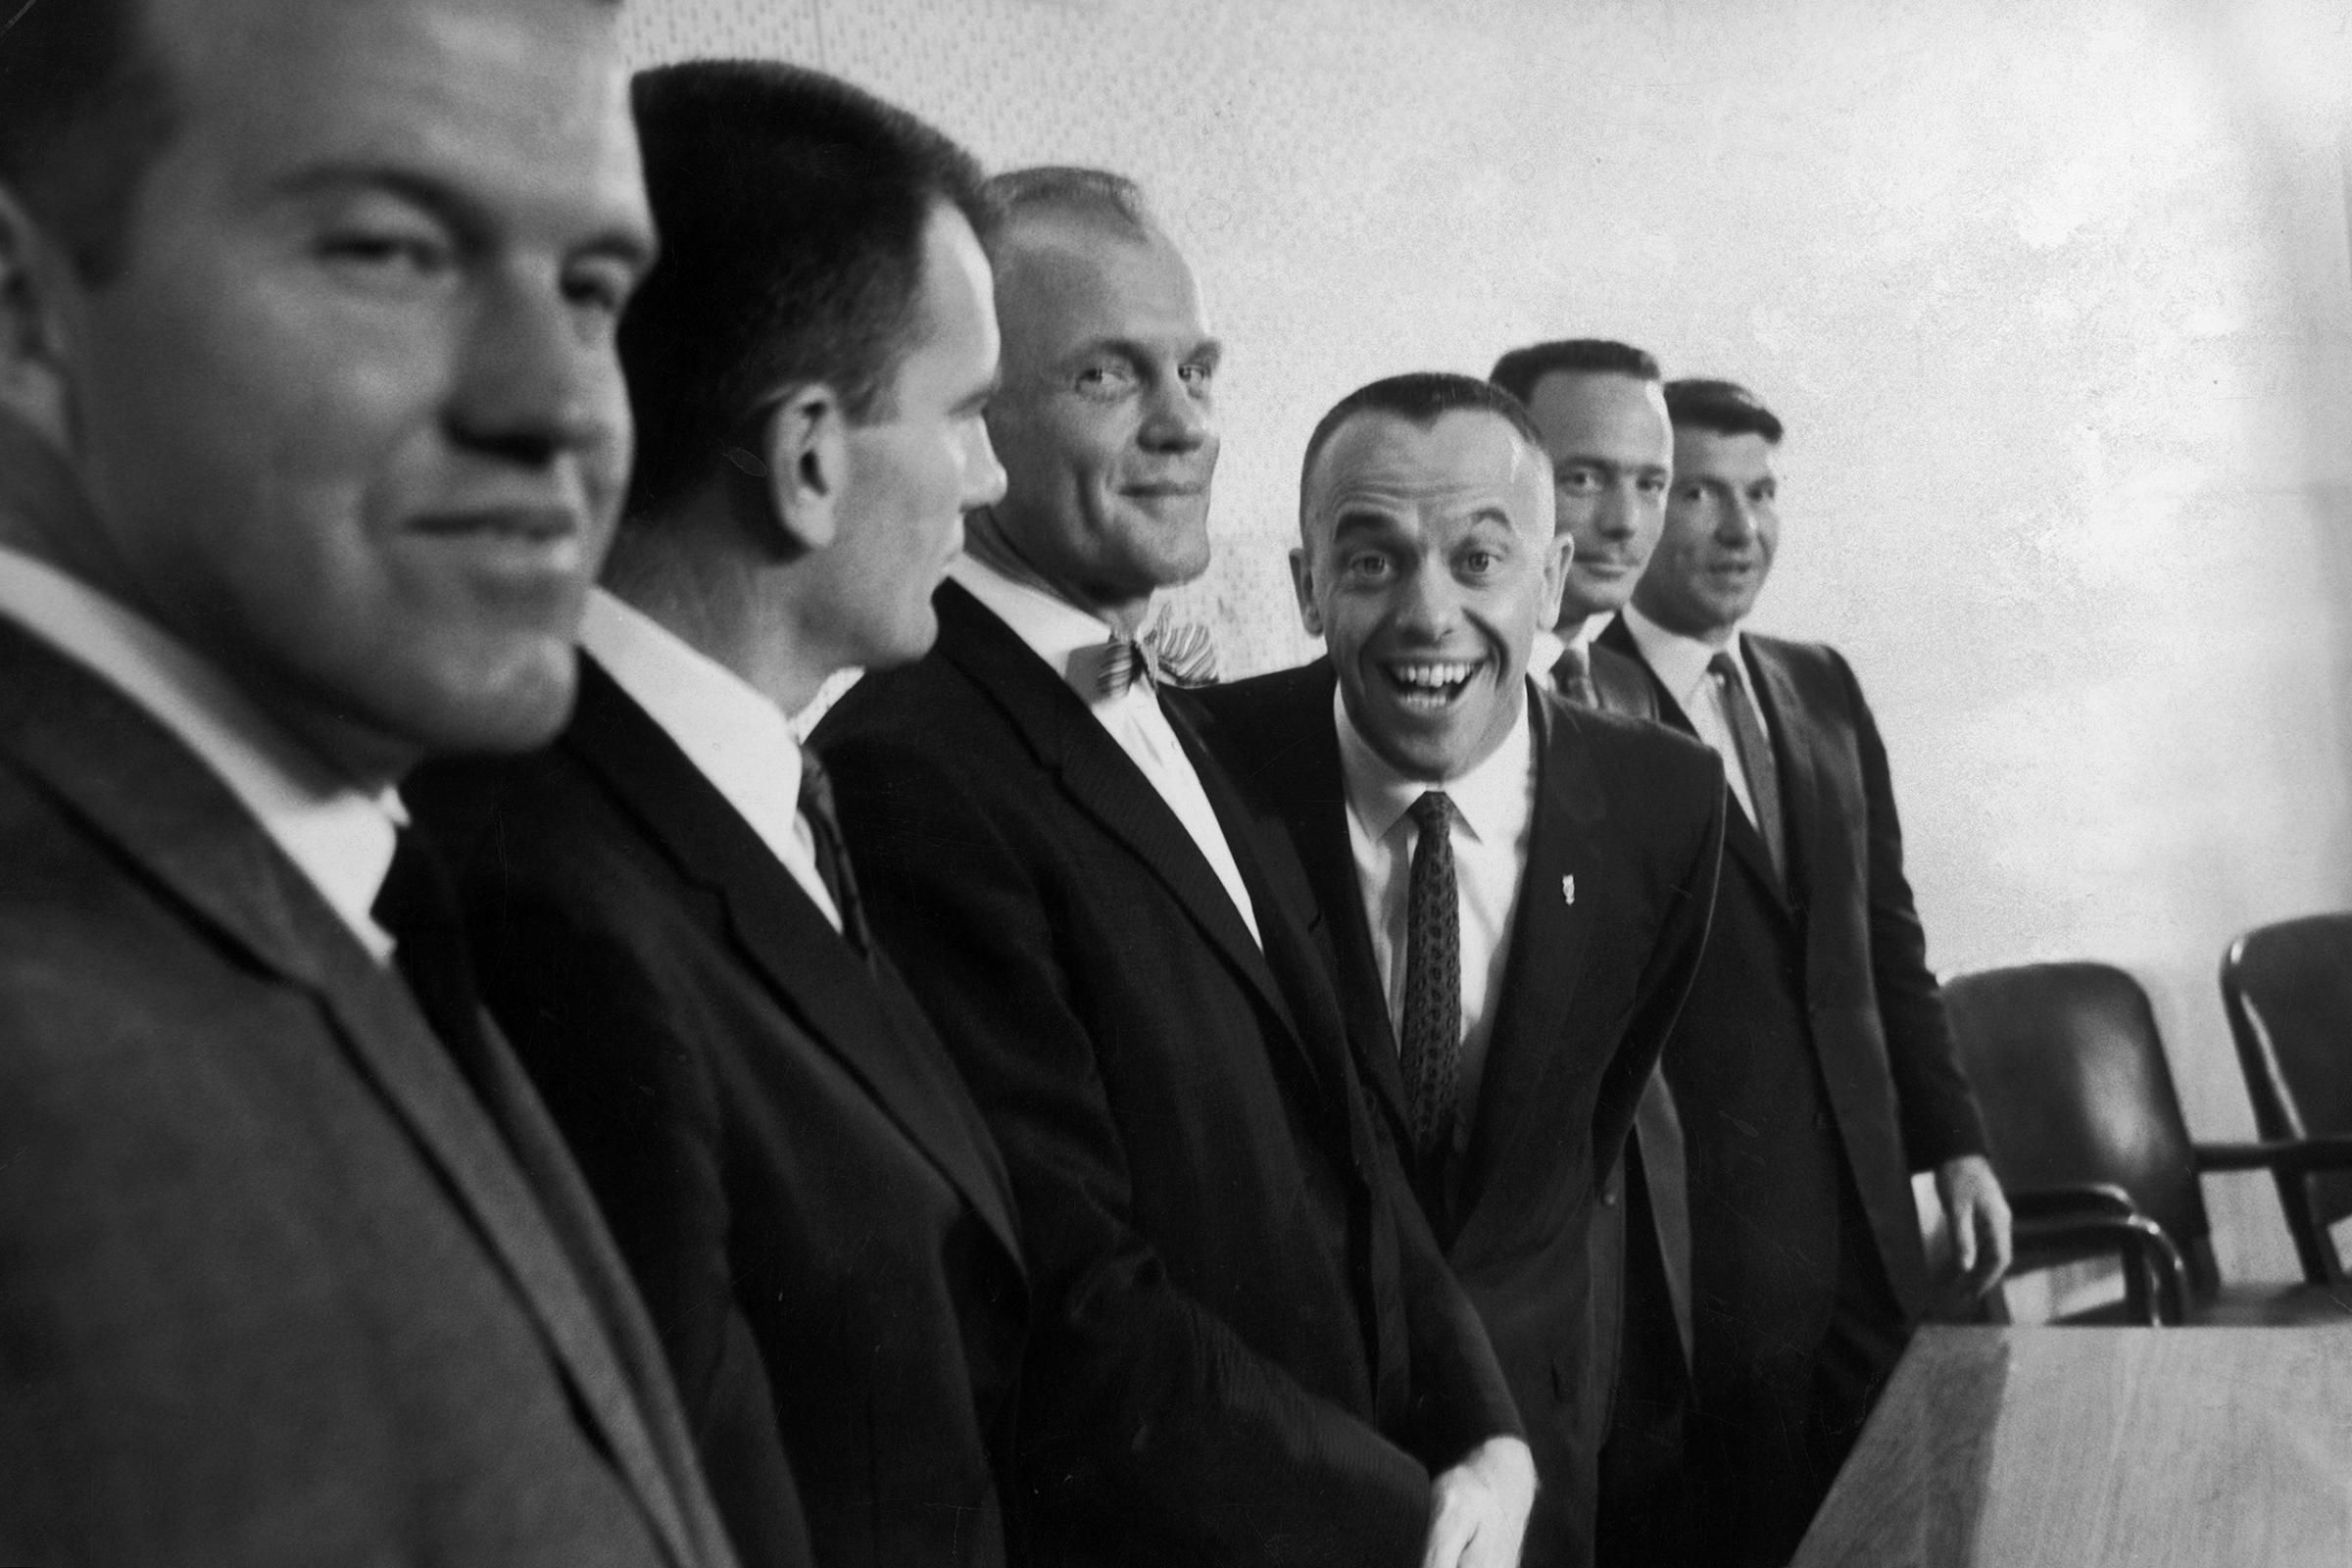 "Smilin' Al" Astronaut Al Shepard alternated between being playful and frosty, earning him the alternating nicknames Smilin' Al and the Ice Commander. Here, in 1961, he shows his goofier side as Glenn, controlled as always, betrays a bemused smile.